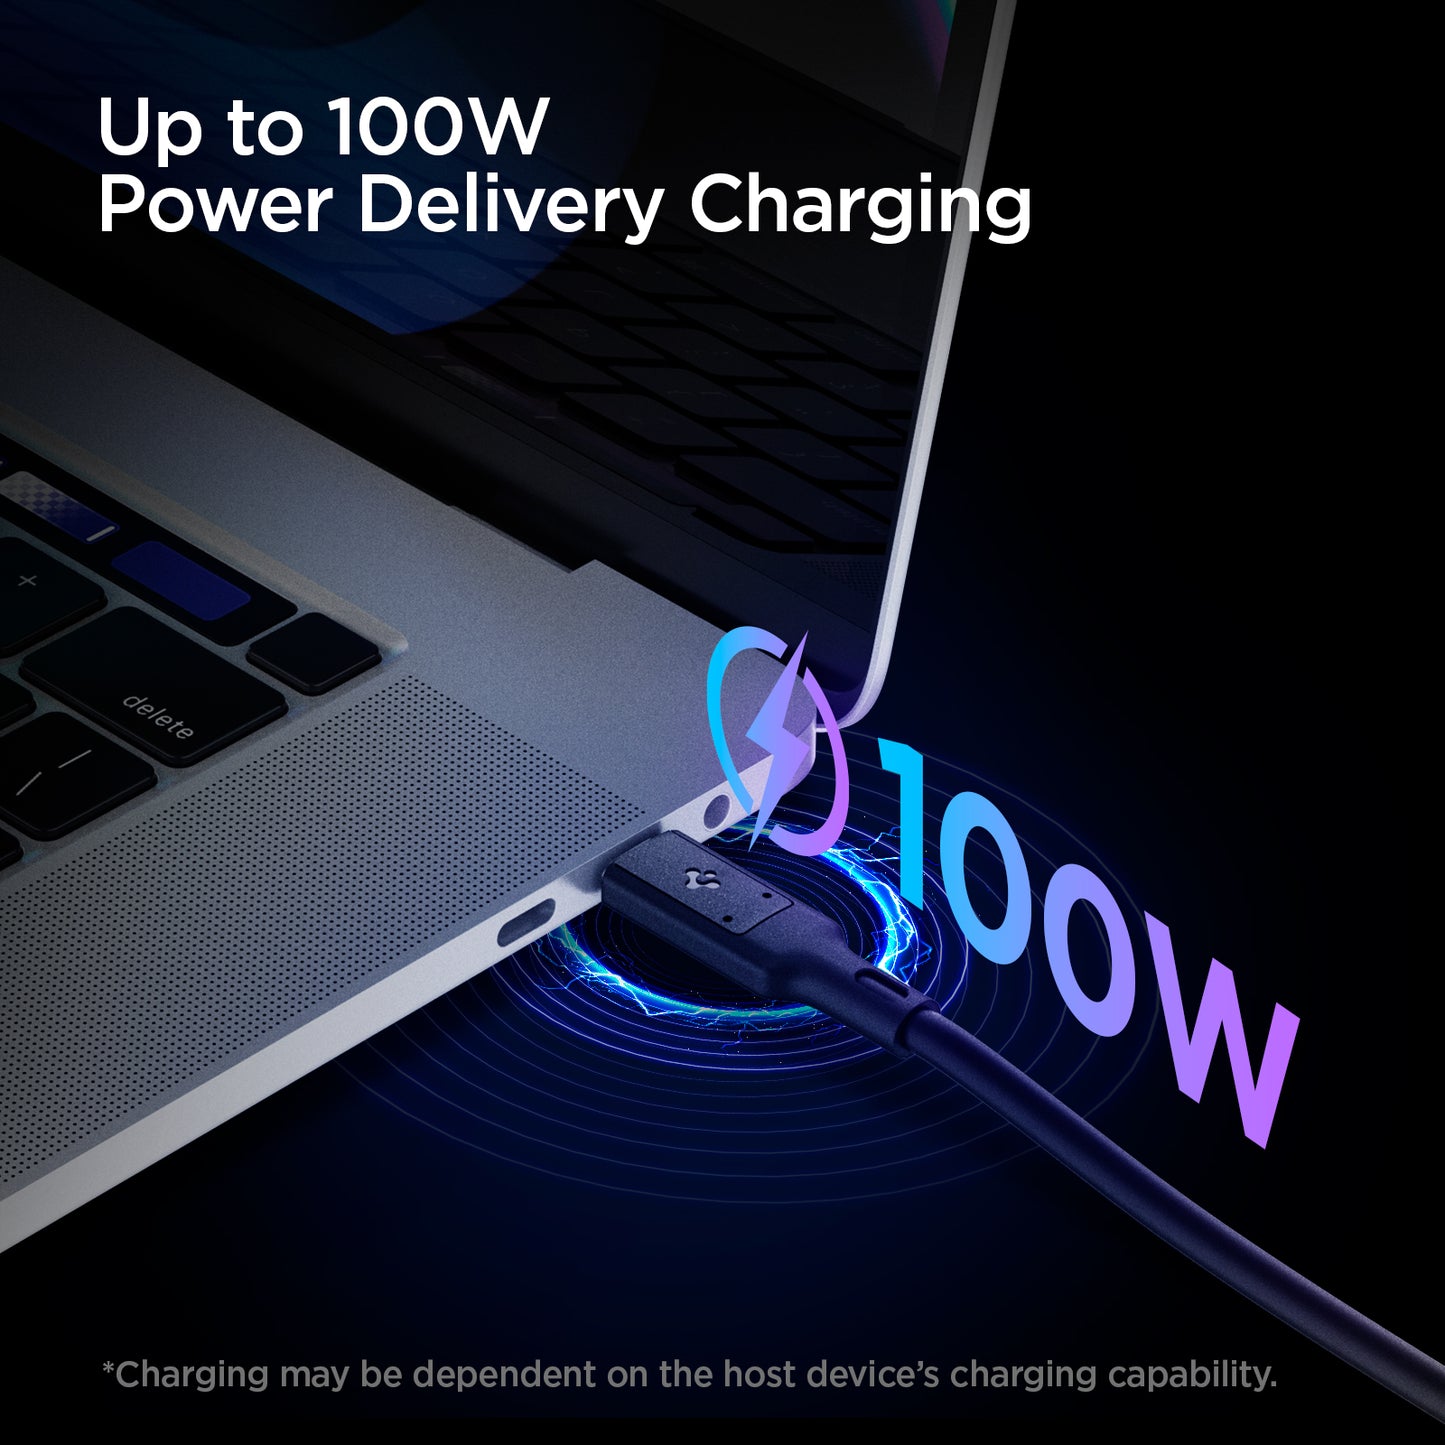 ACA02201 - ArcWire™ USB-C to USB-C 4 Cable PB2000 in Black showing the Up to 100W Power Delivery Charging. 100W power. Charging may be dependent on the host device's charging capability.